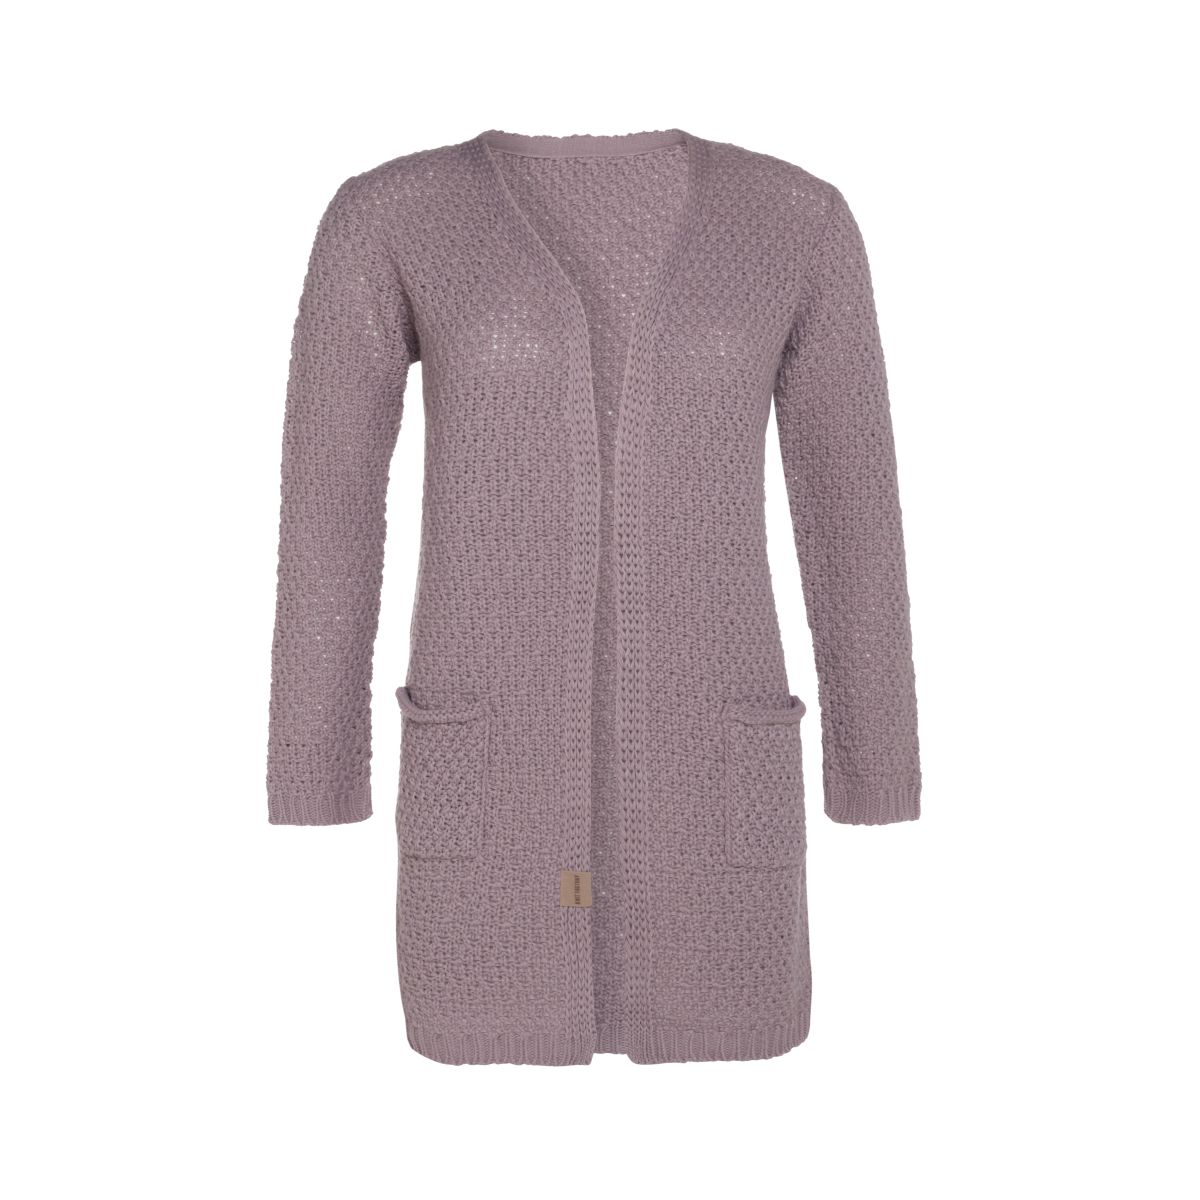 luna knitted cardigan mauve 3638 with side pockets